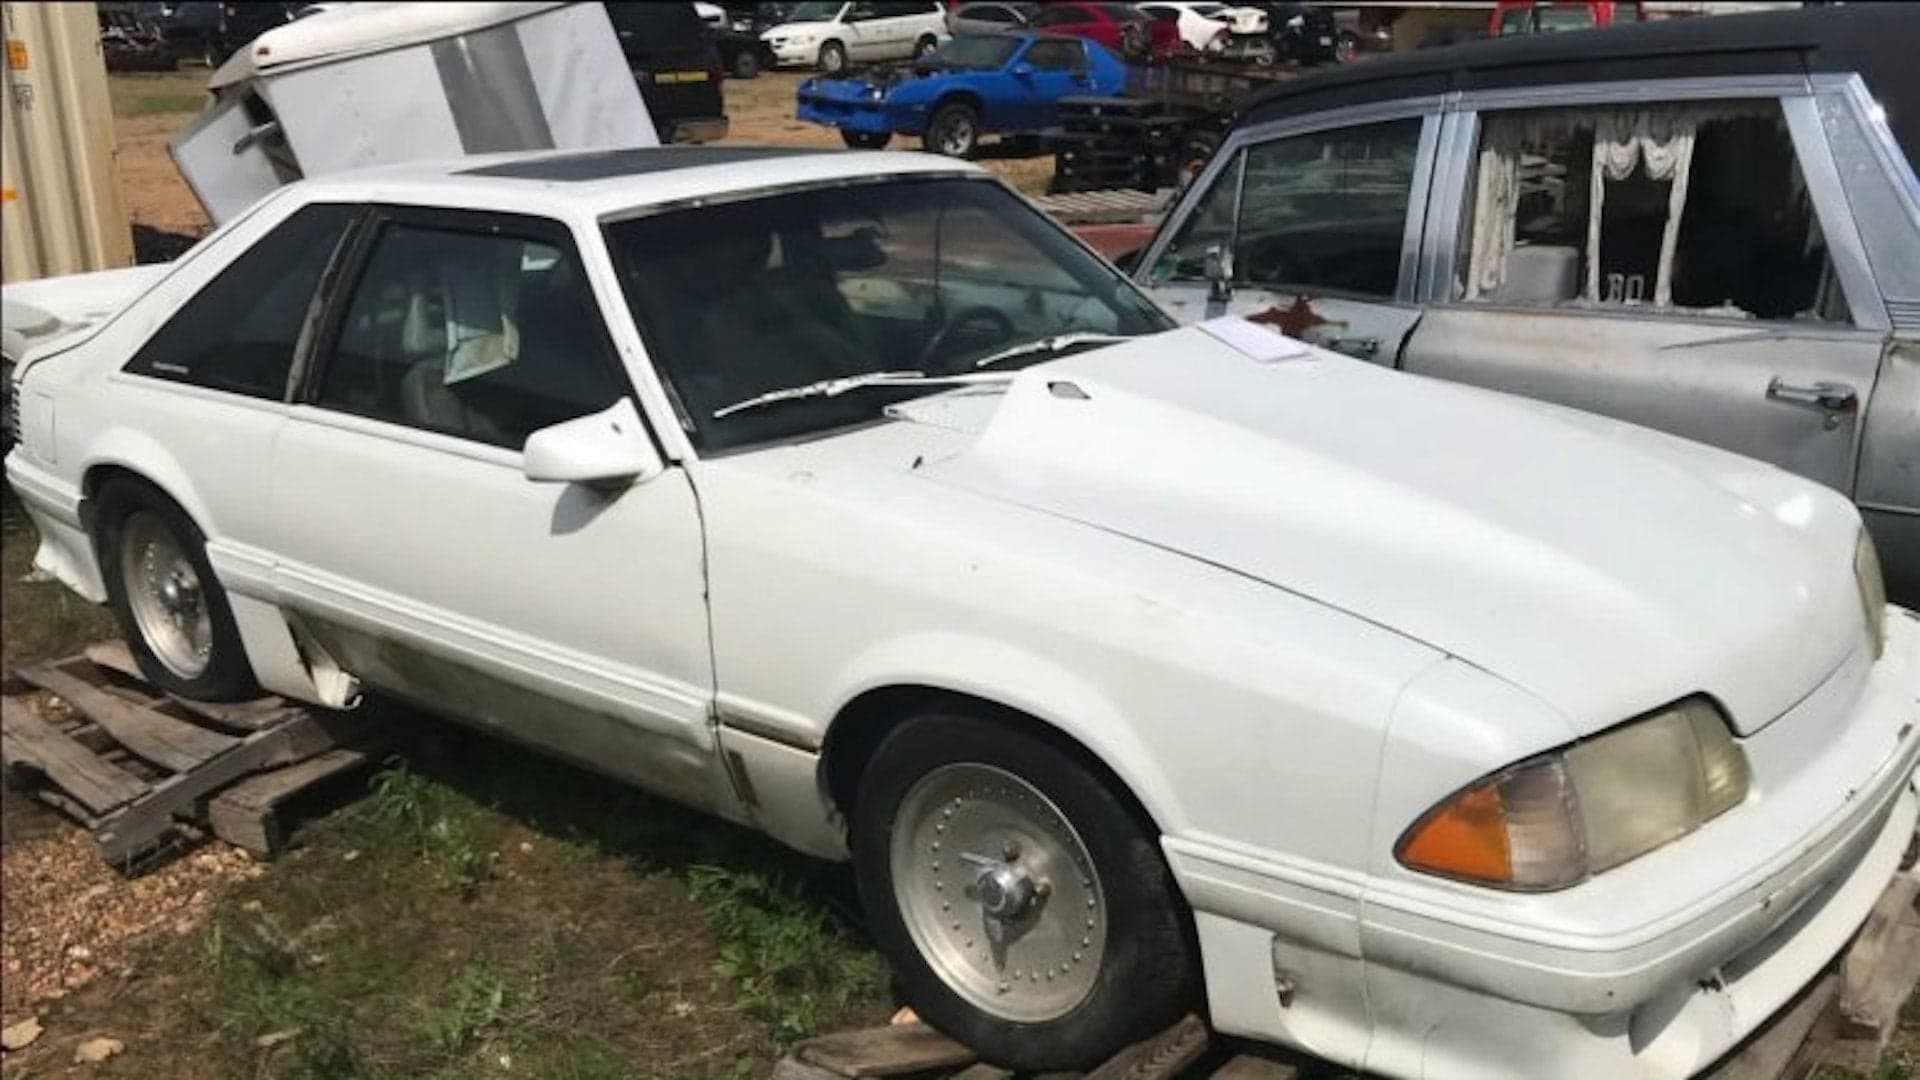 Stolen Ford Mustang Foxbody Recovered Nearly Three Decades After It Originally Disappeared